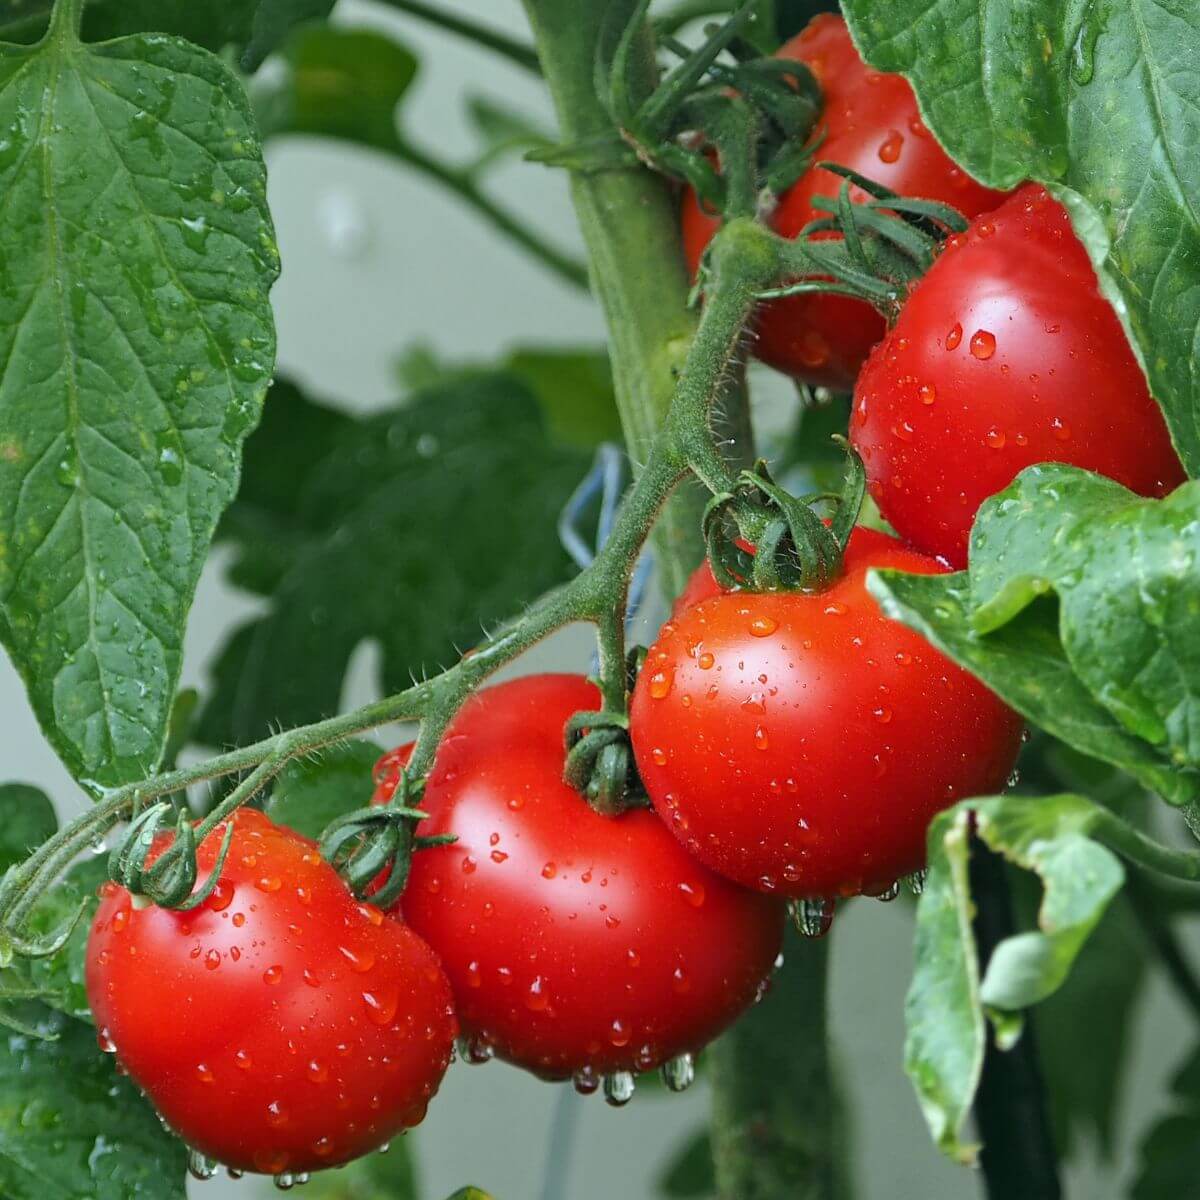 Tomatoes - Nutrition, Health and Beauty Benefits